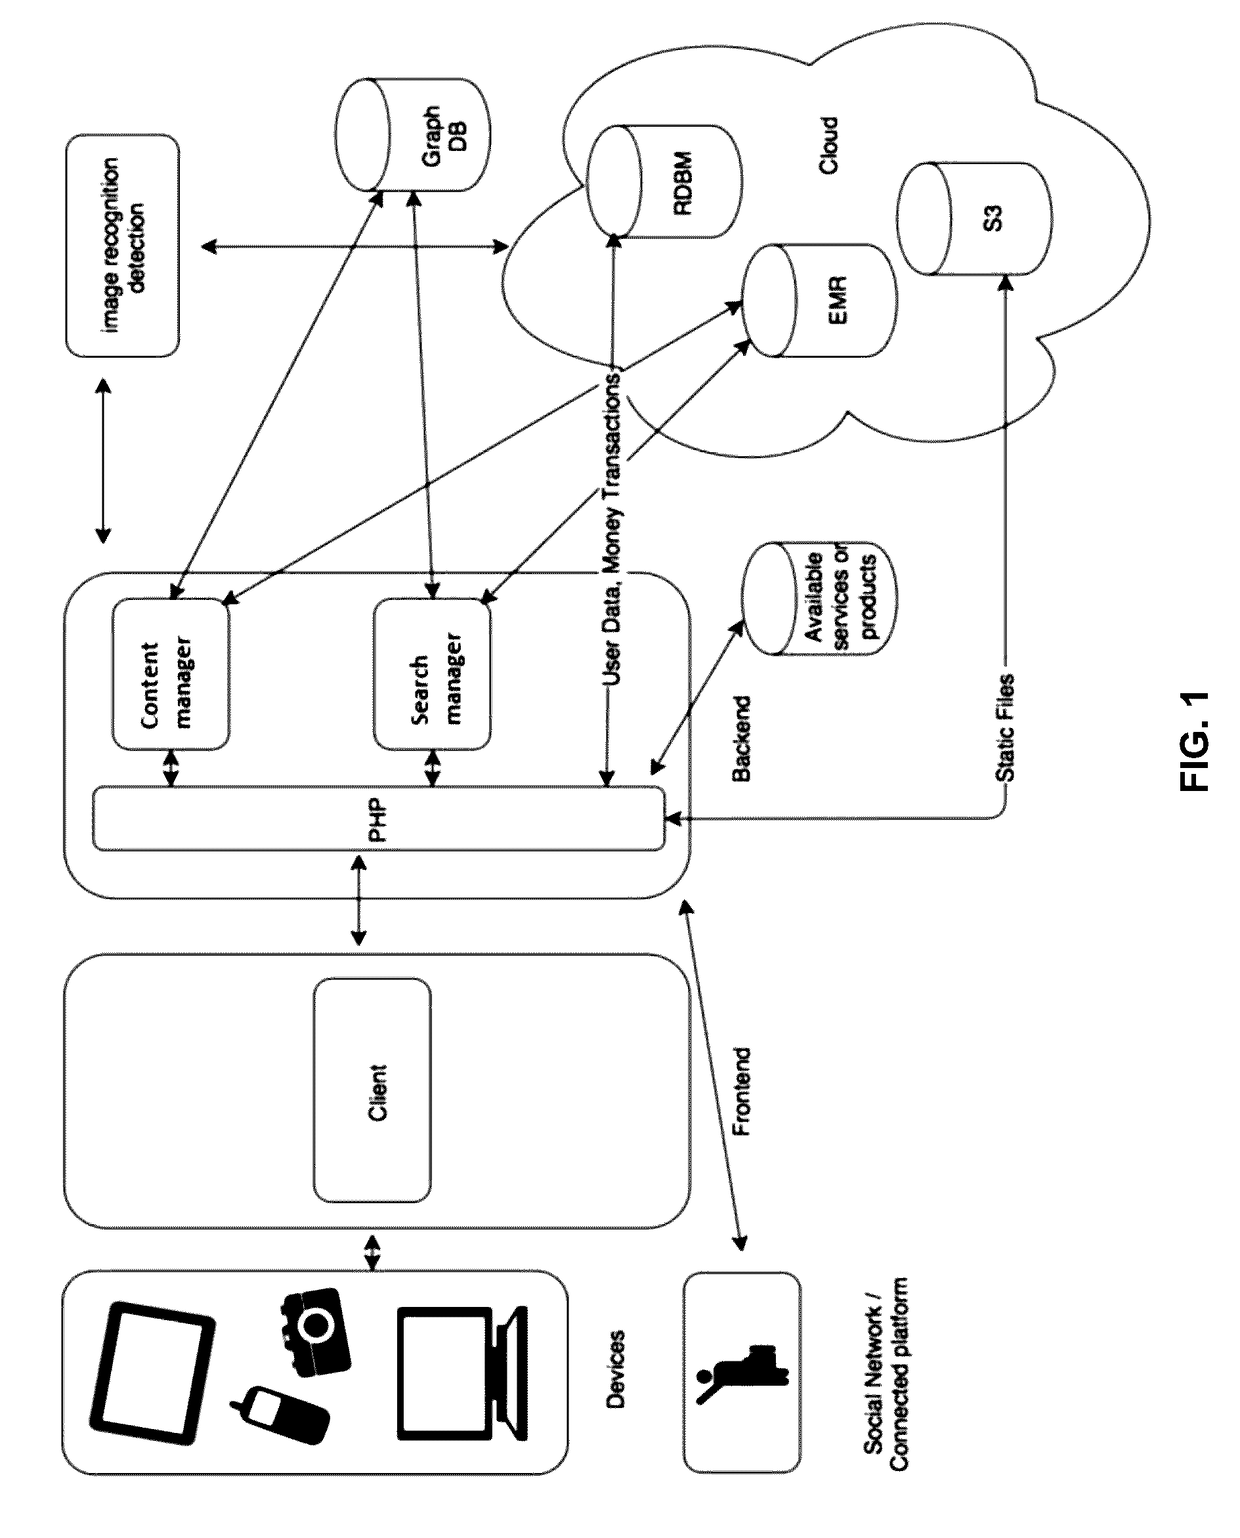 Electronic System and Method for Travel Planning, Based On Object-Oriented Technology